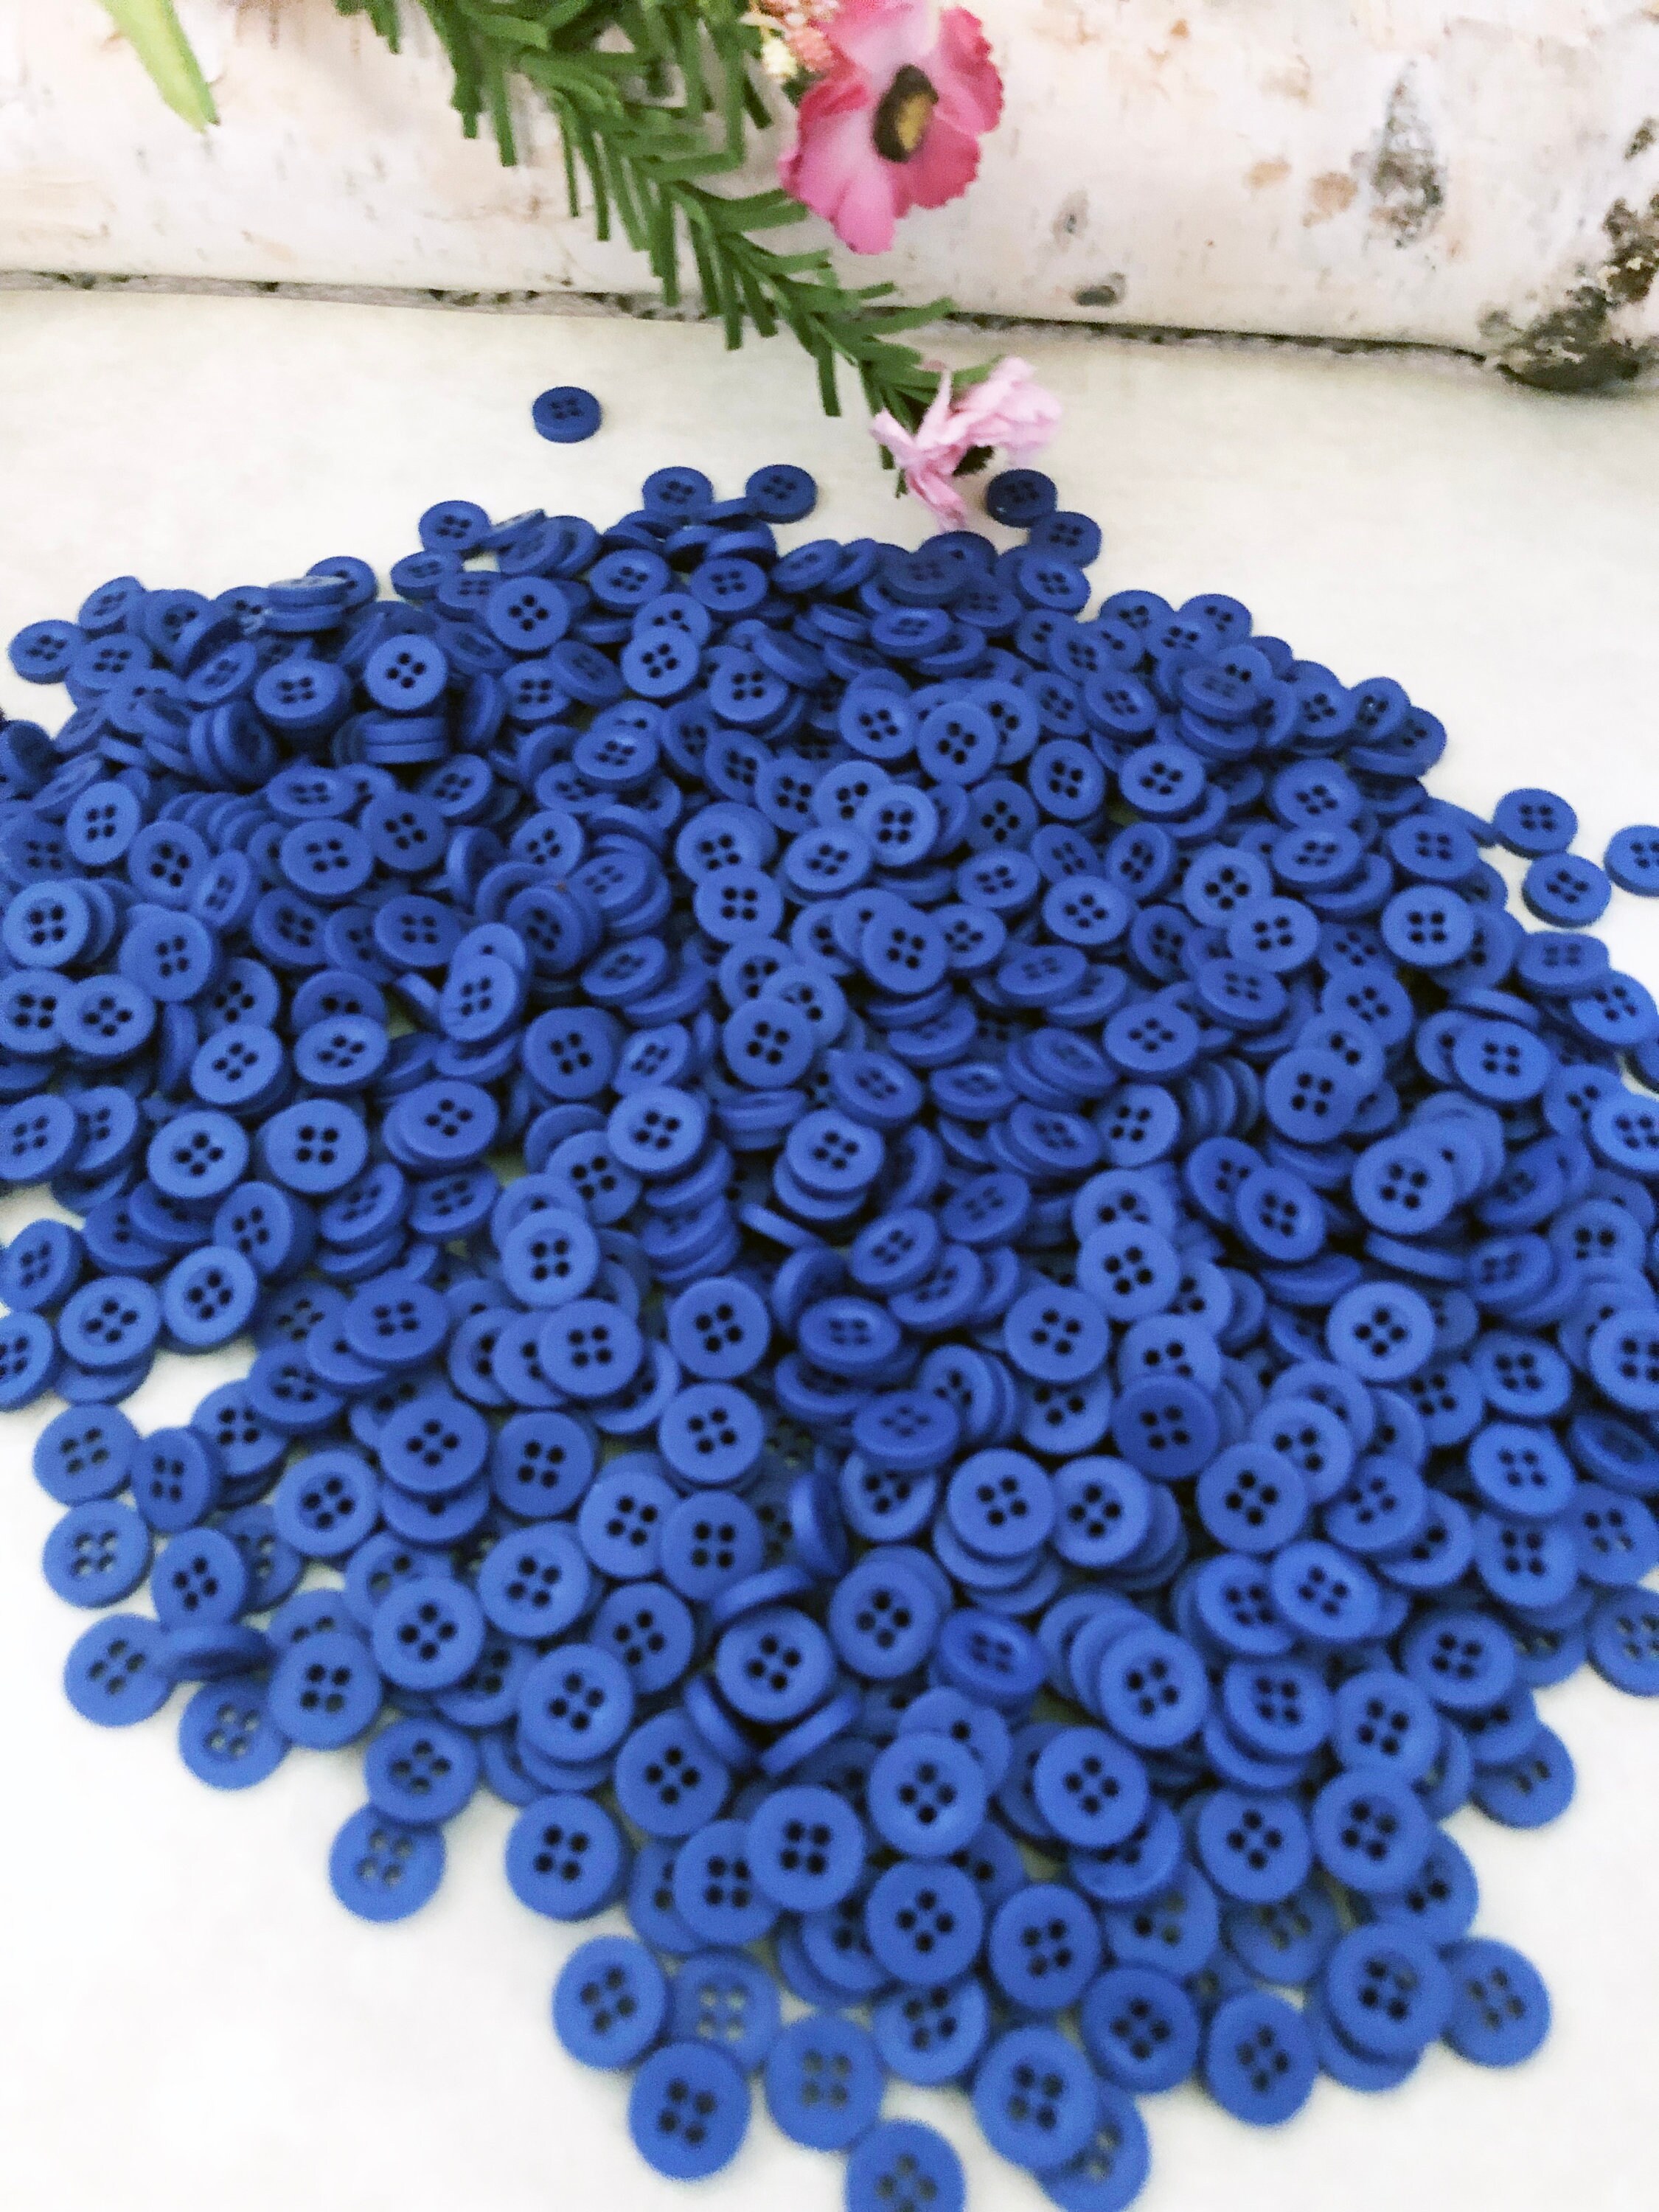 Dark Blue Buttons Shell Looking Shine Made of Resin Flat 